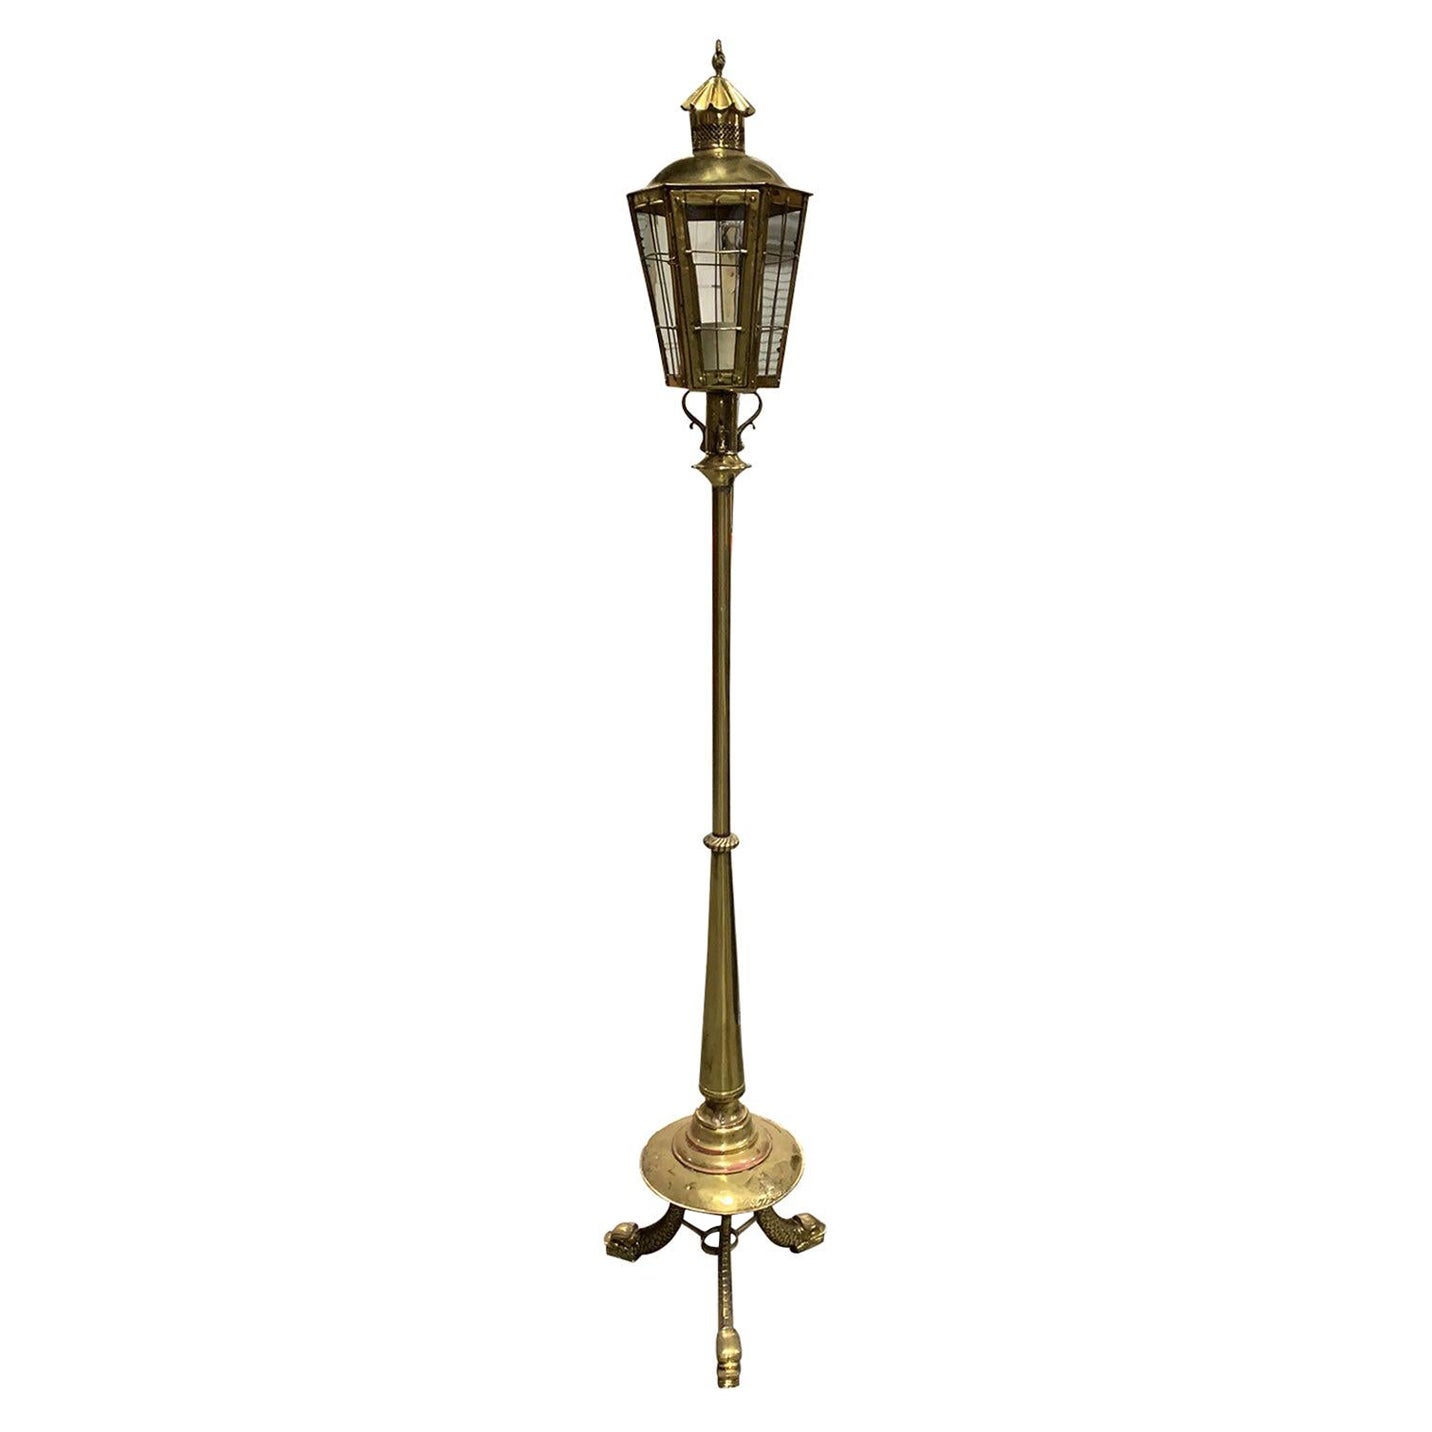 19th-20th Century Continental Brass Torchiere or Floor Lantern For Sale